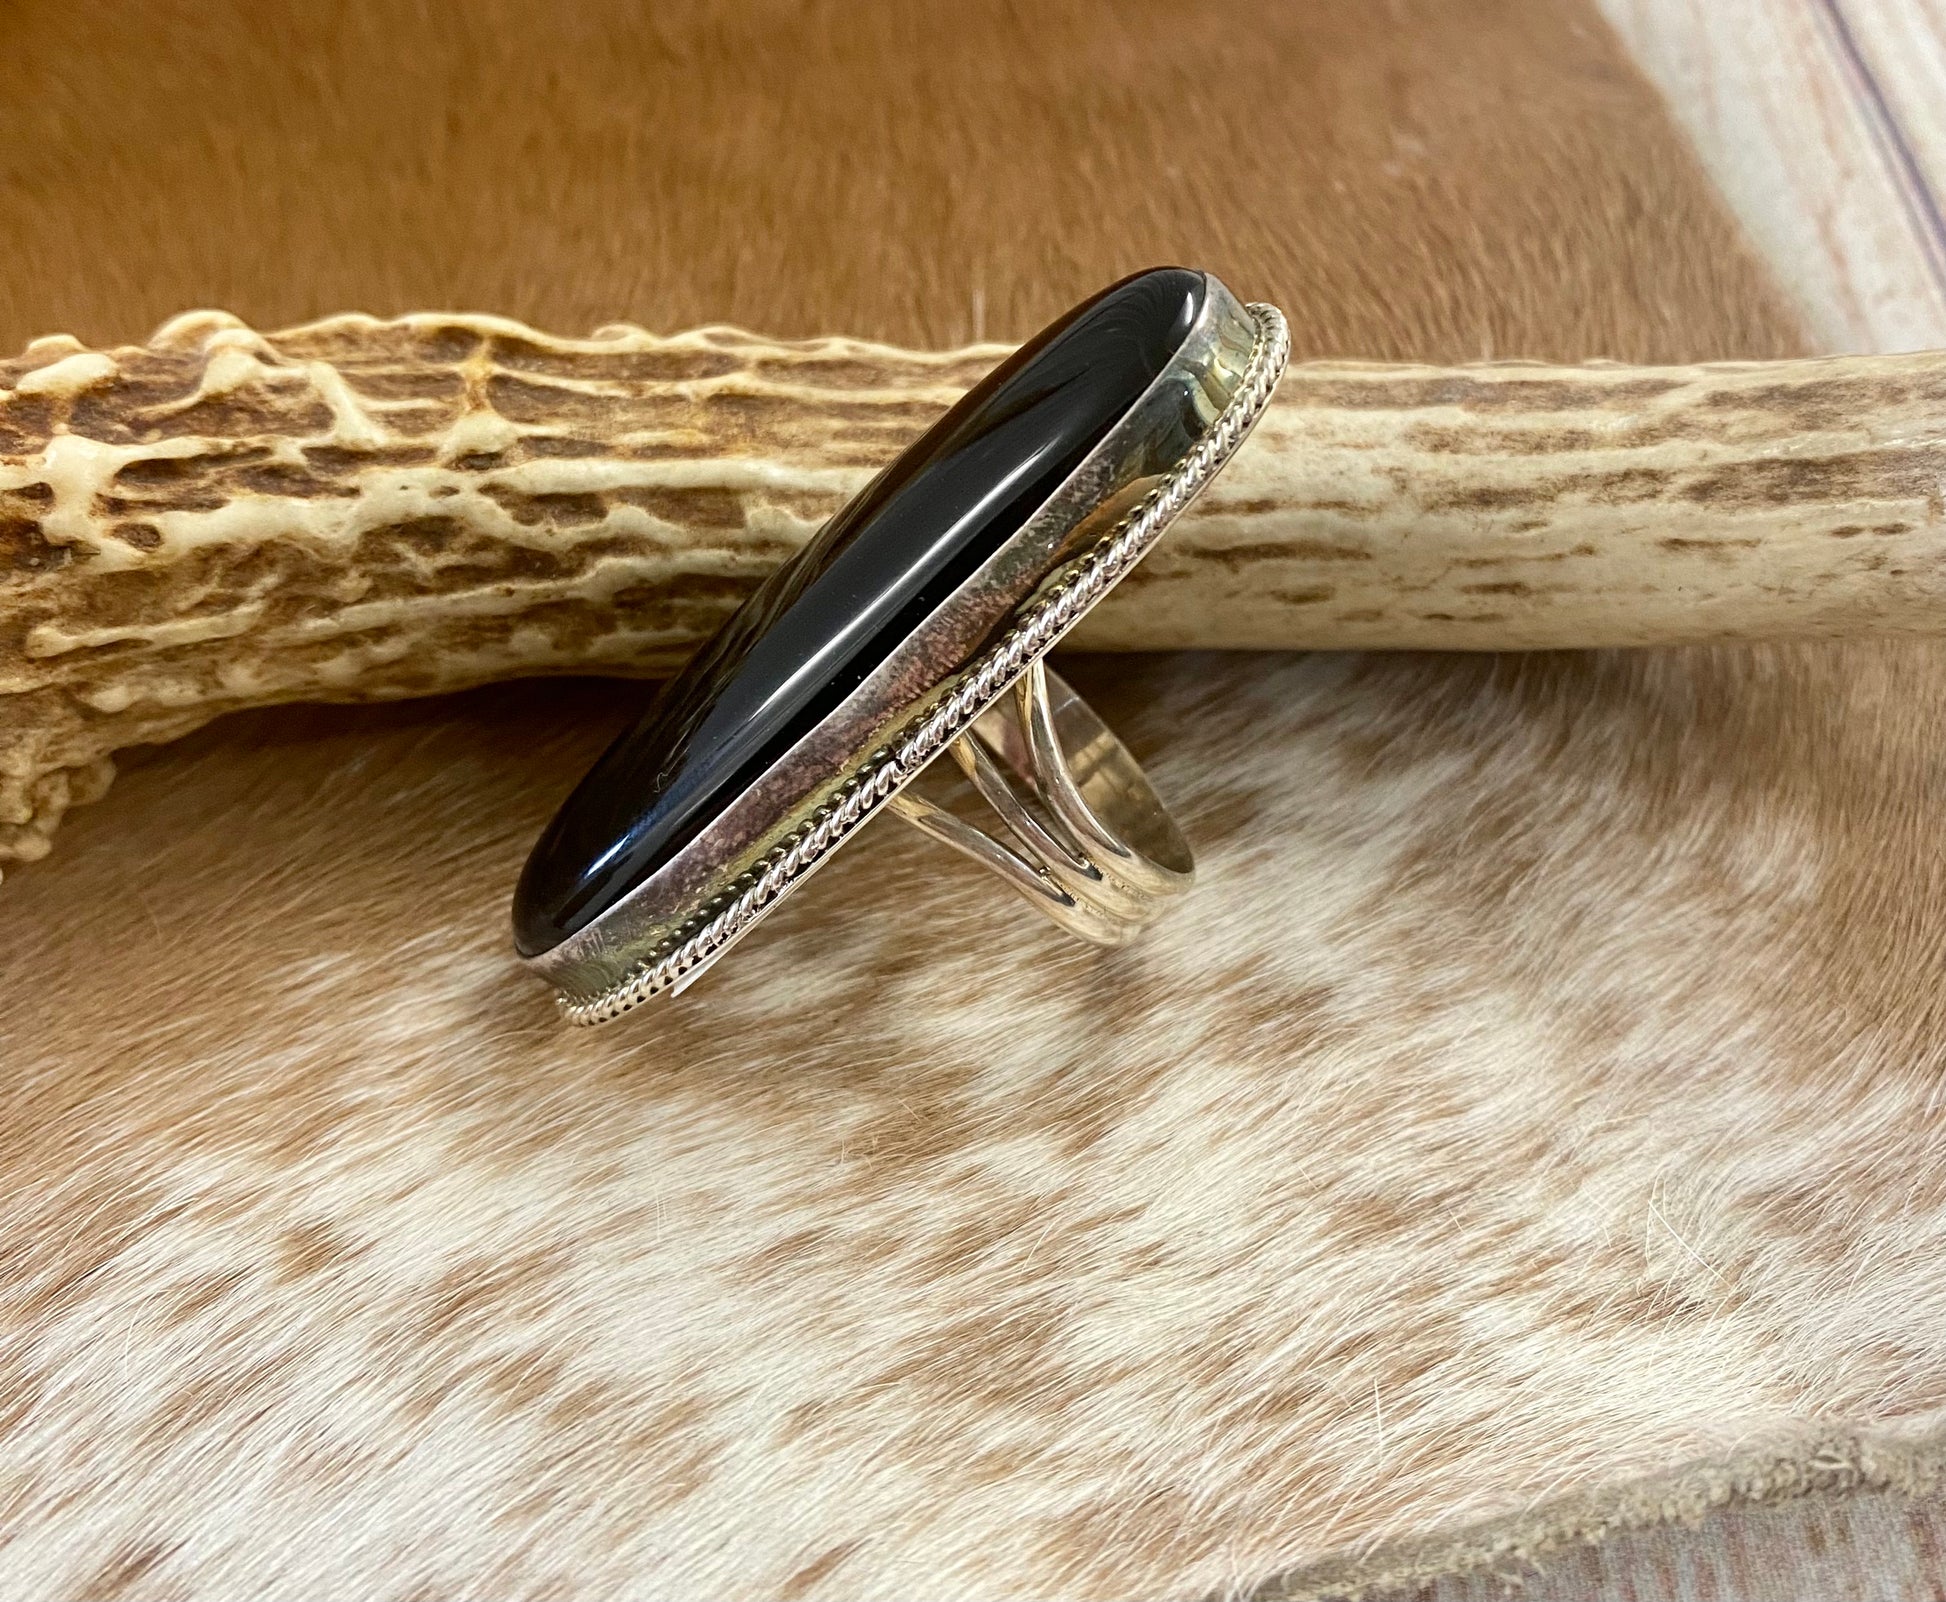 Large sterling silver onyx single stone handmade statement size 9 ring. Stamped sterling and signed RT artist silversmith on the back of the ring. The perfect unique piece of jewelry to add to your next outfit!   Size: 2” inches length x 3/4” inch width   Ring Size: 9  Signed: YES "RT "  Stone: Onyx